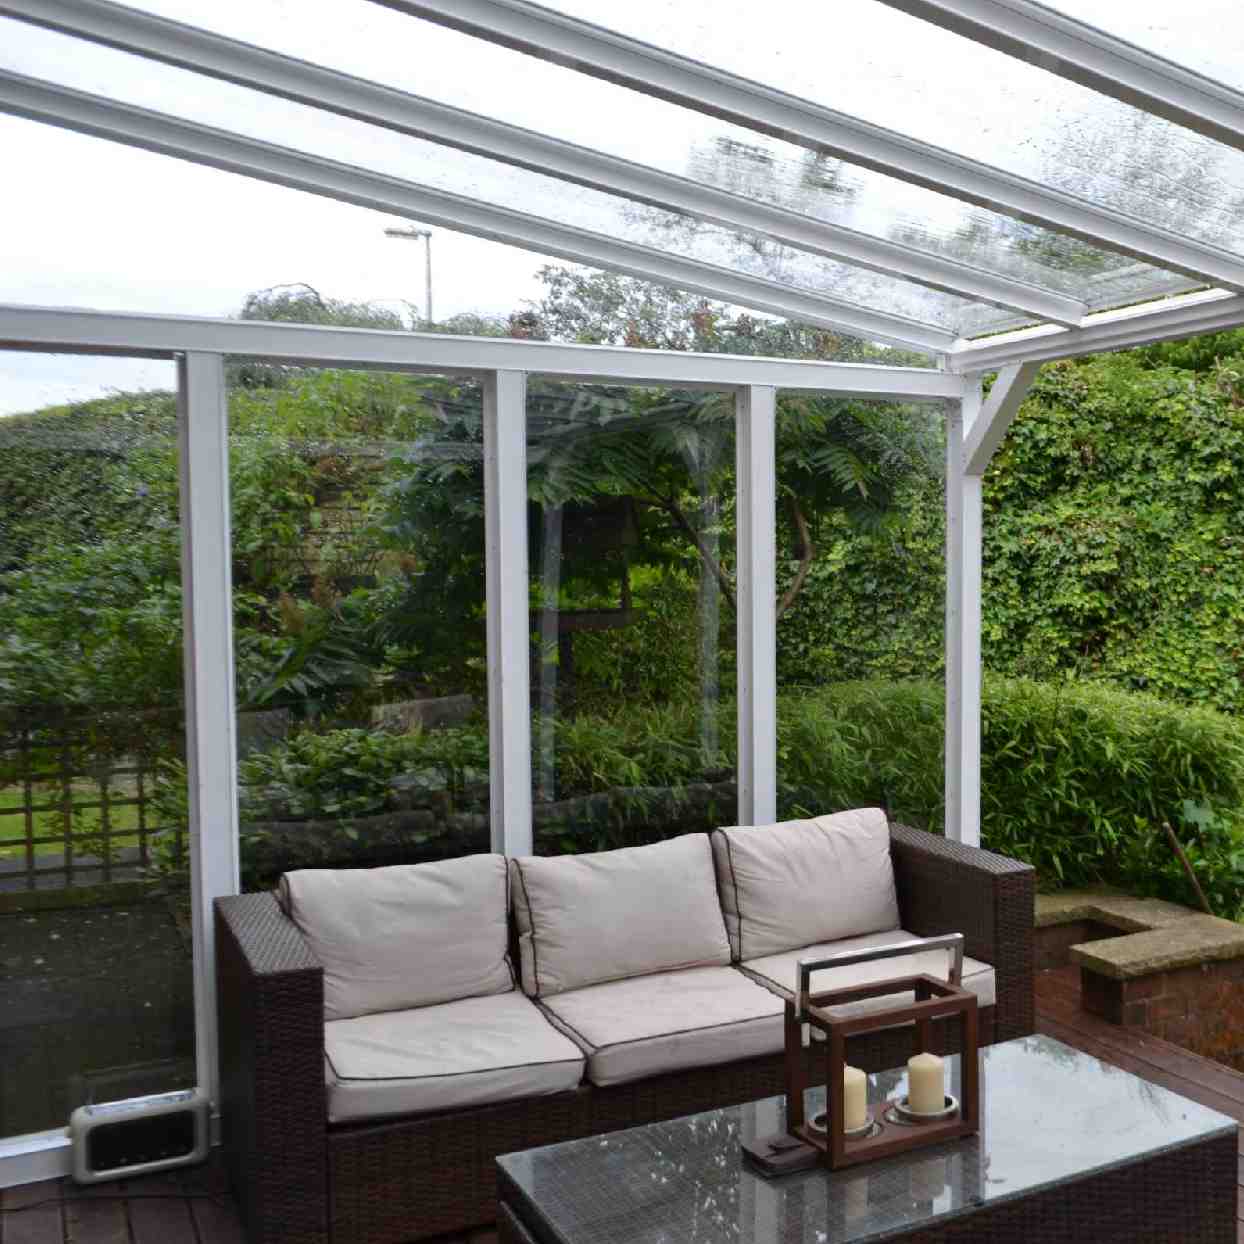 Buy Omega Verandah White with 6mm Glass Clear Plate Polycarbonate Glazing - 7.7m (W) x 3.5m (P), (4) Supporting Posts online today